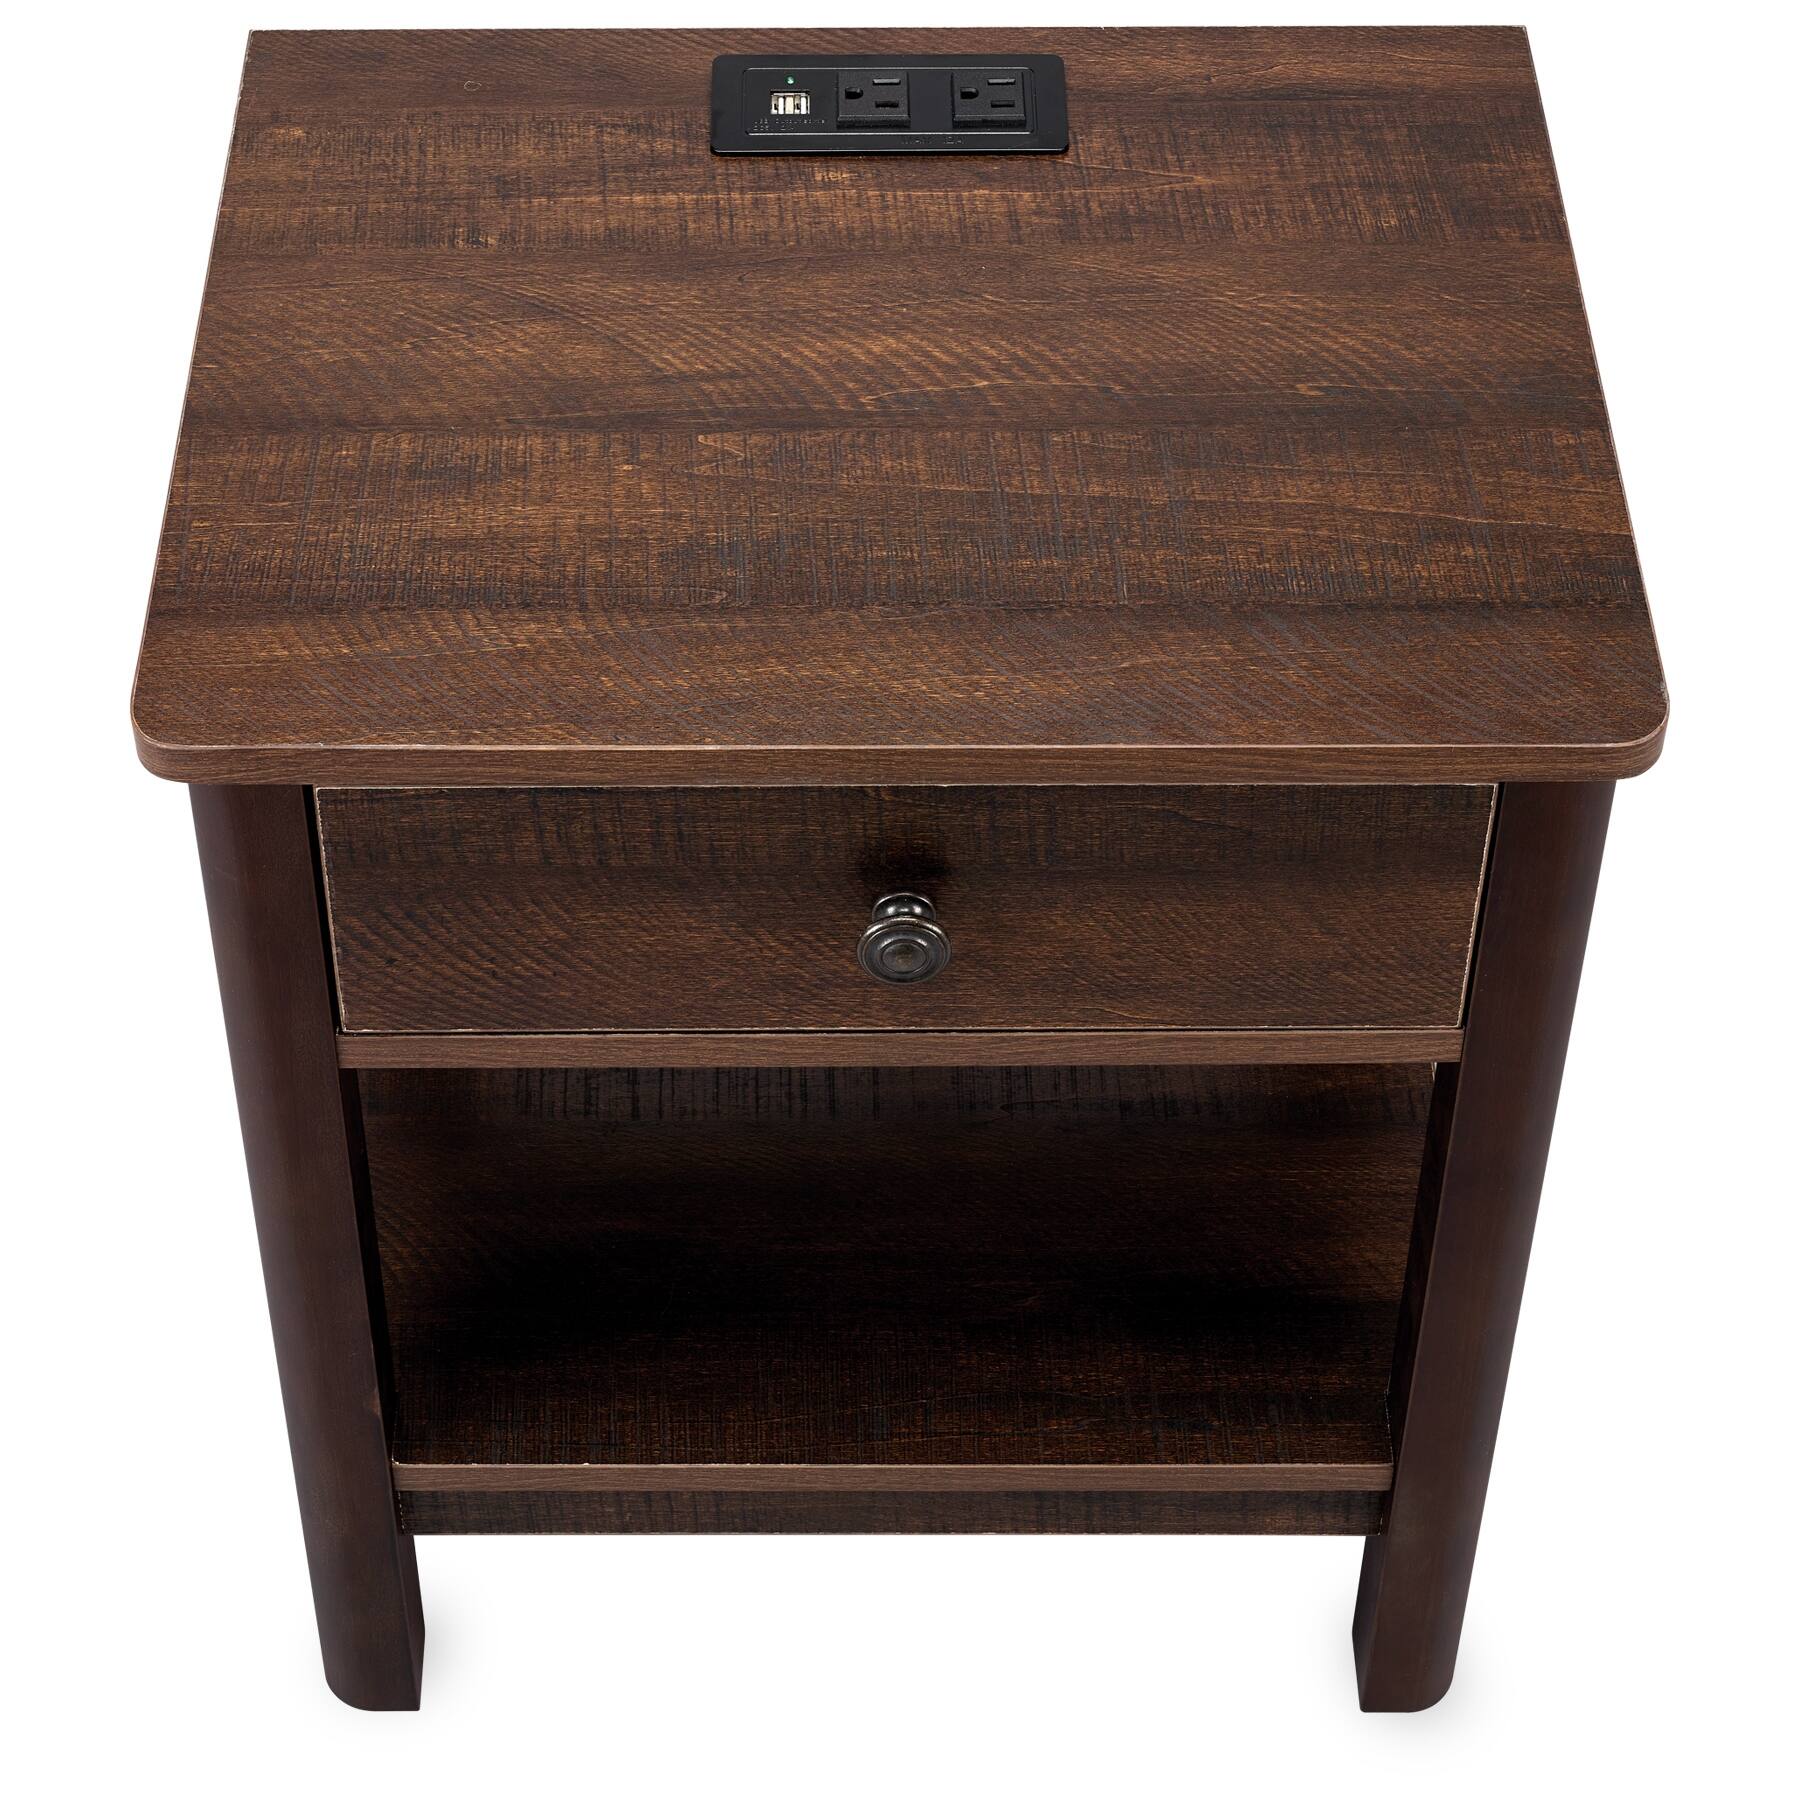 DecorTech Traditional Rectangular End Table with AC Power and USB Charging Ports, Walnut